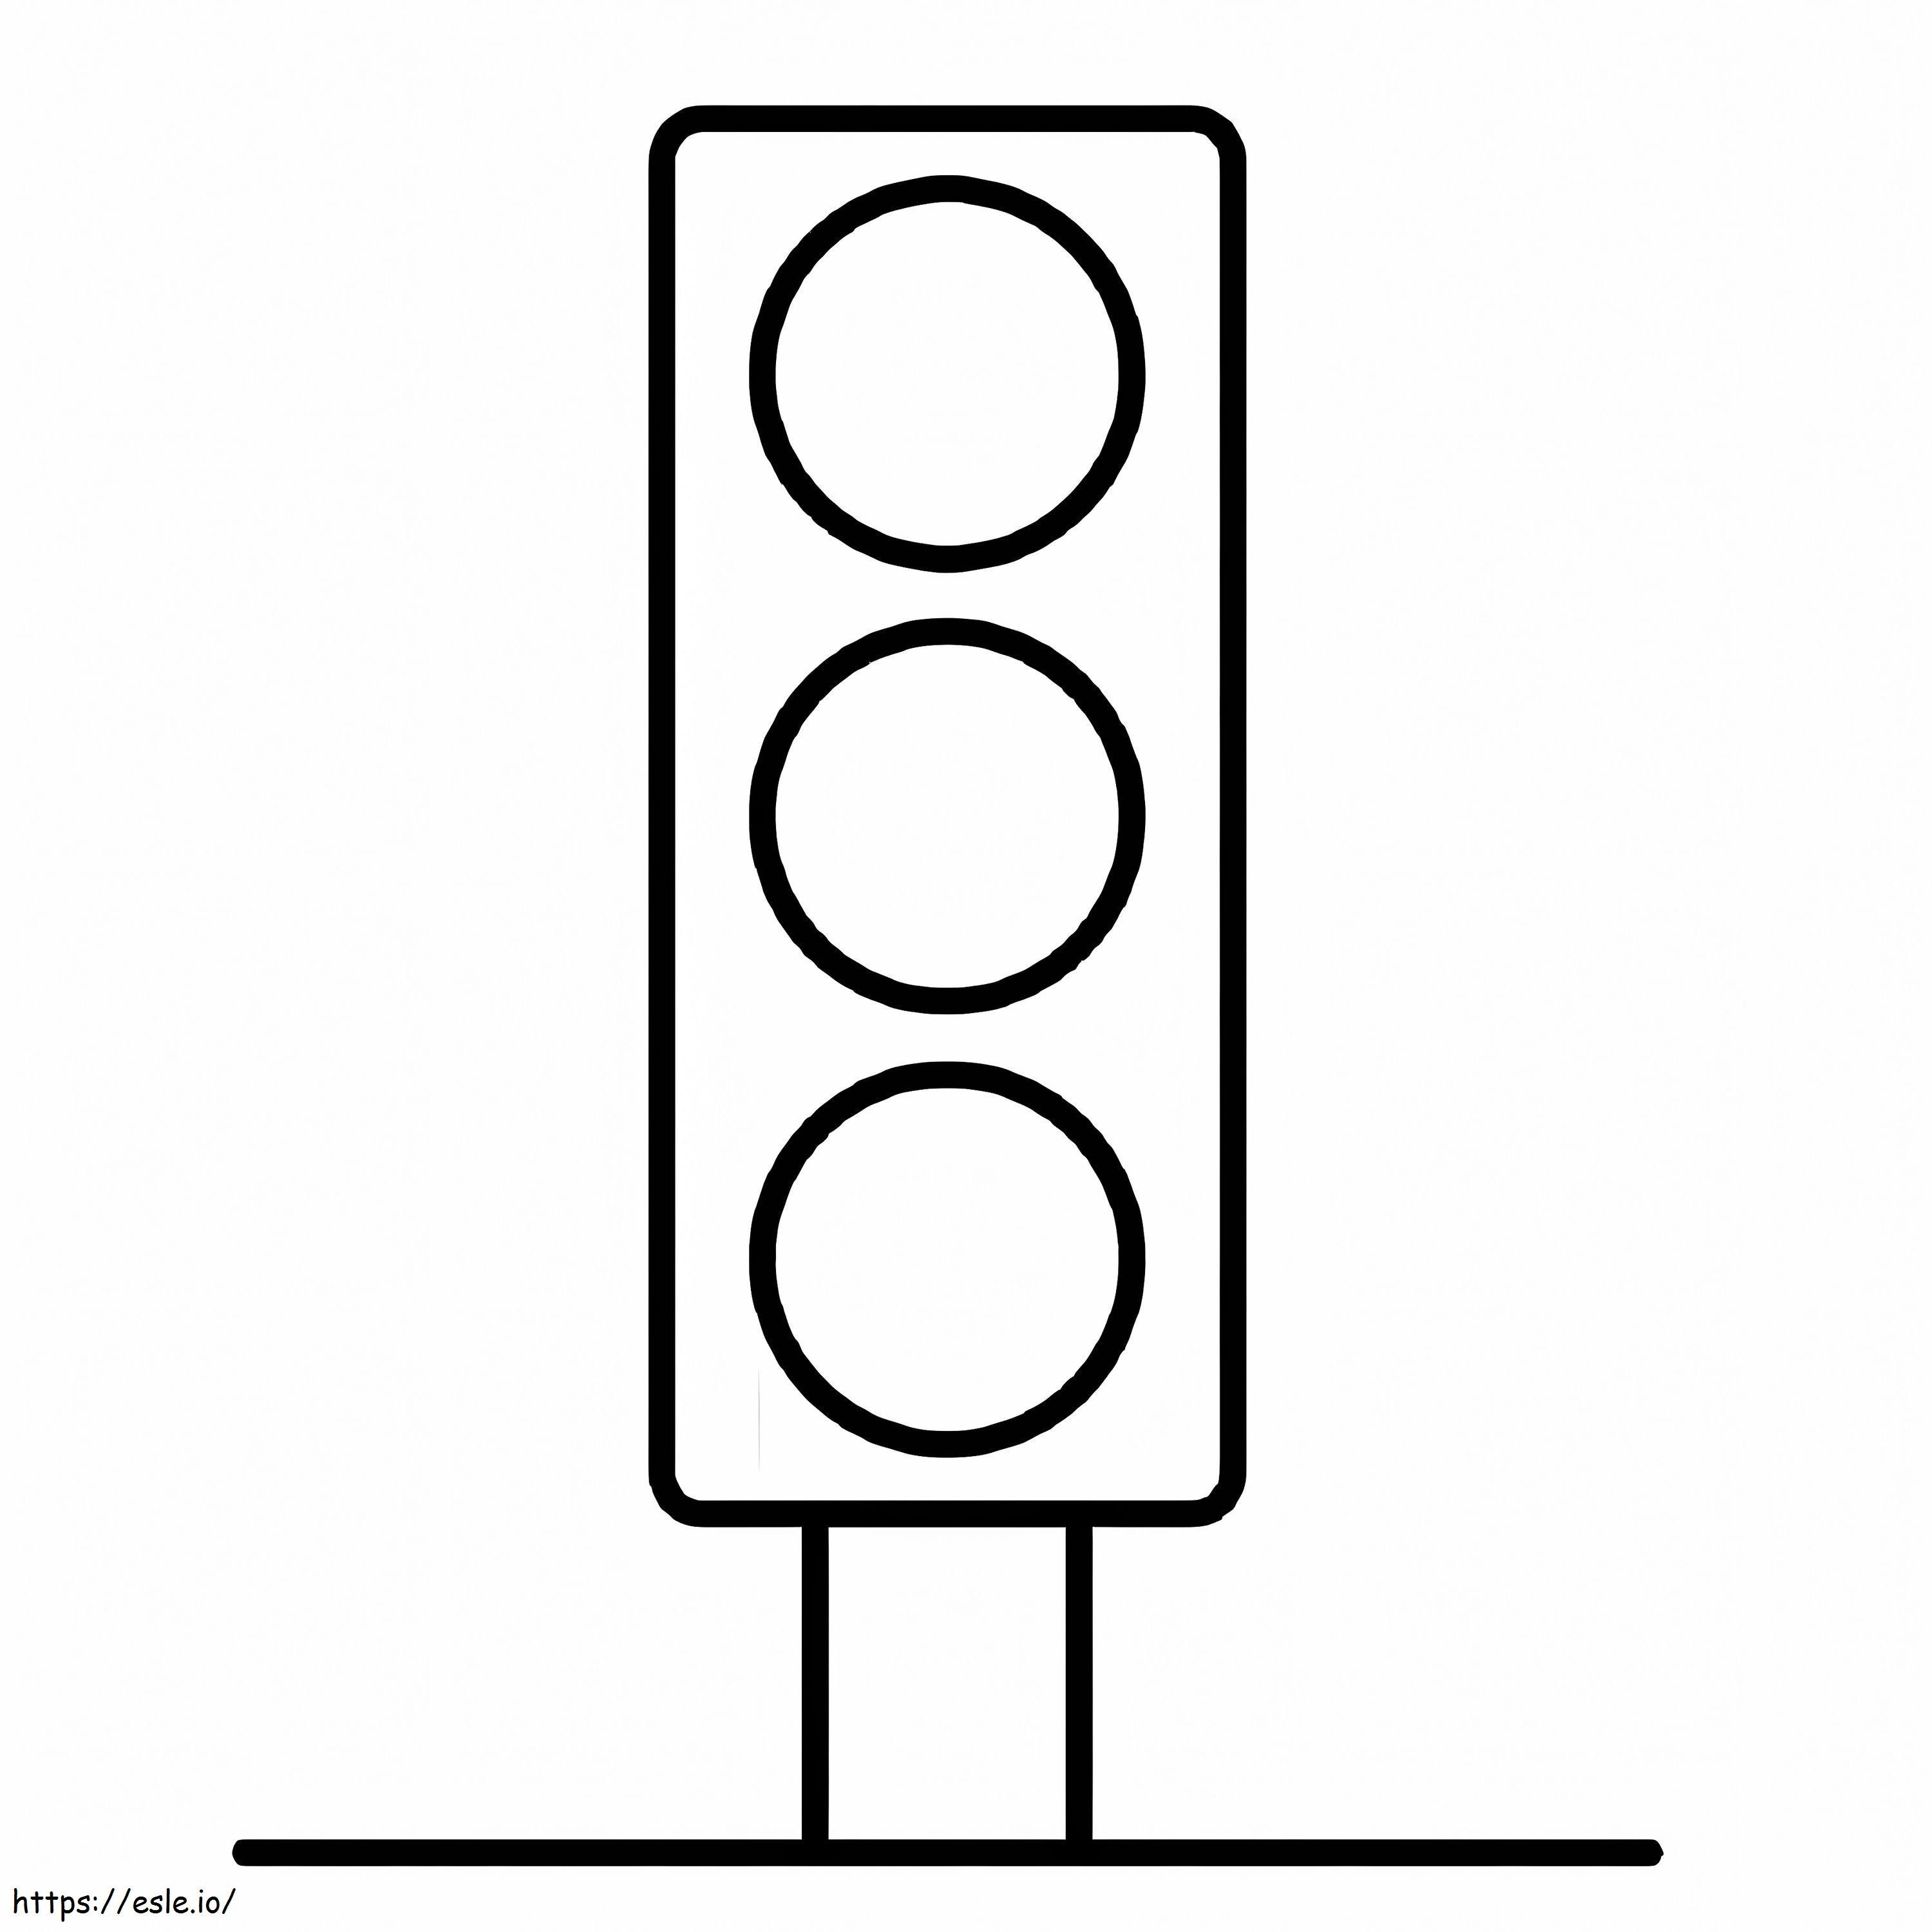 Normal Traffic Light coloring page